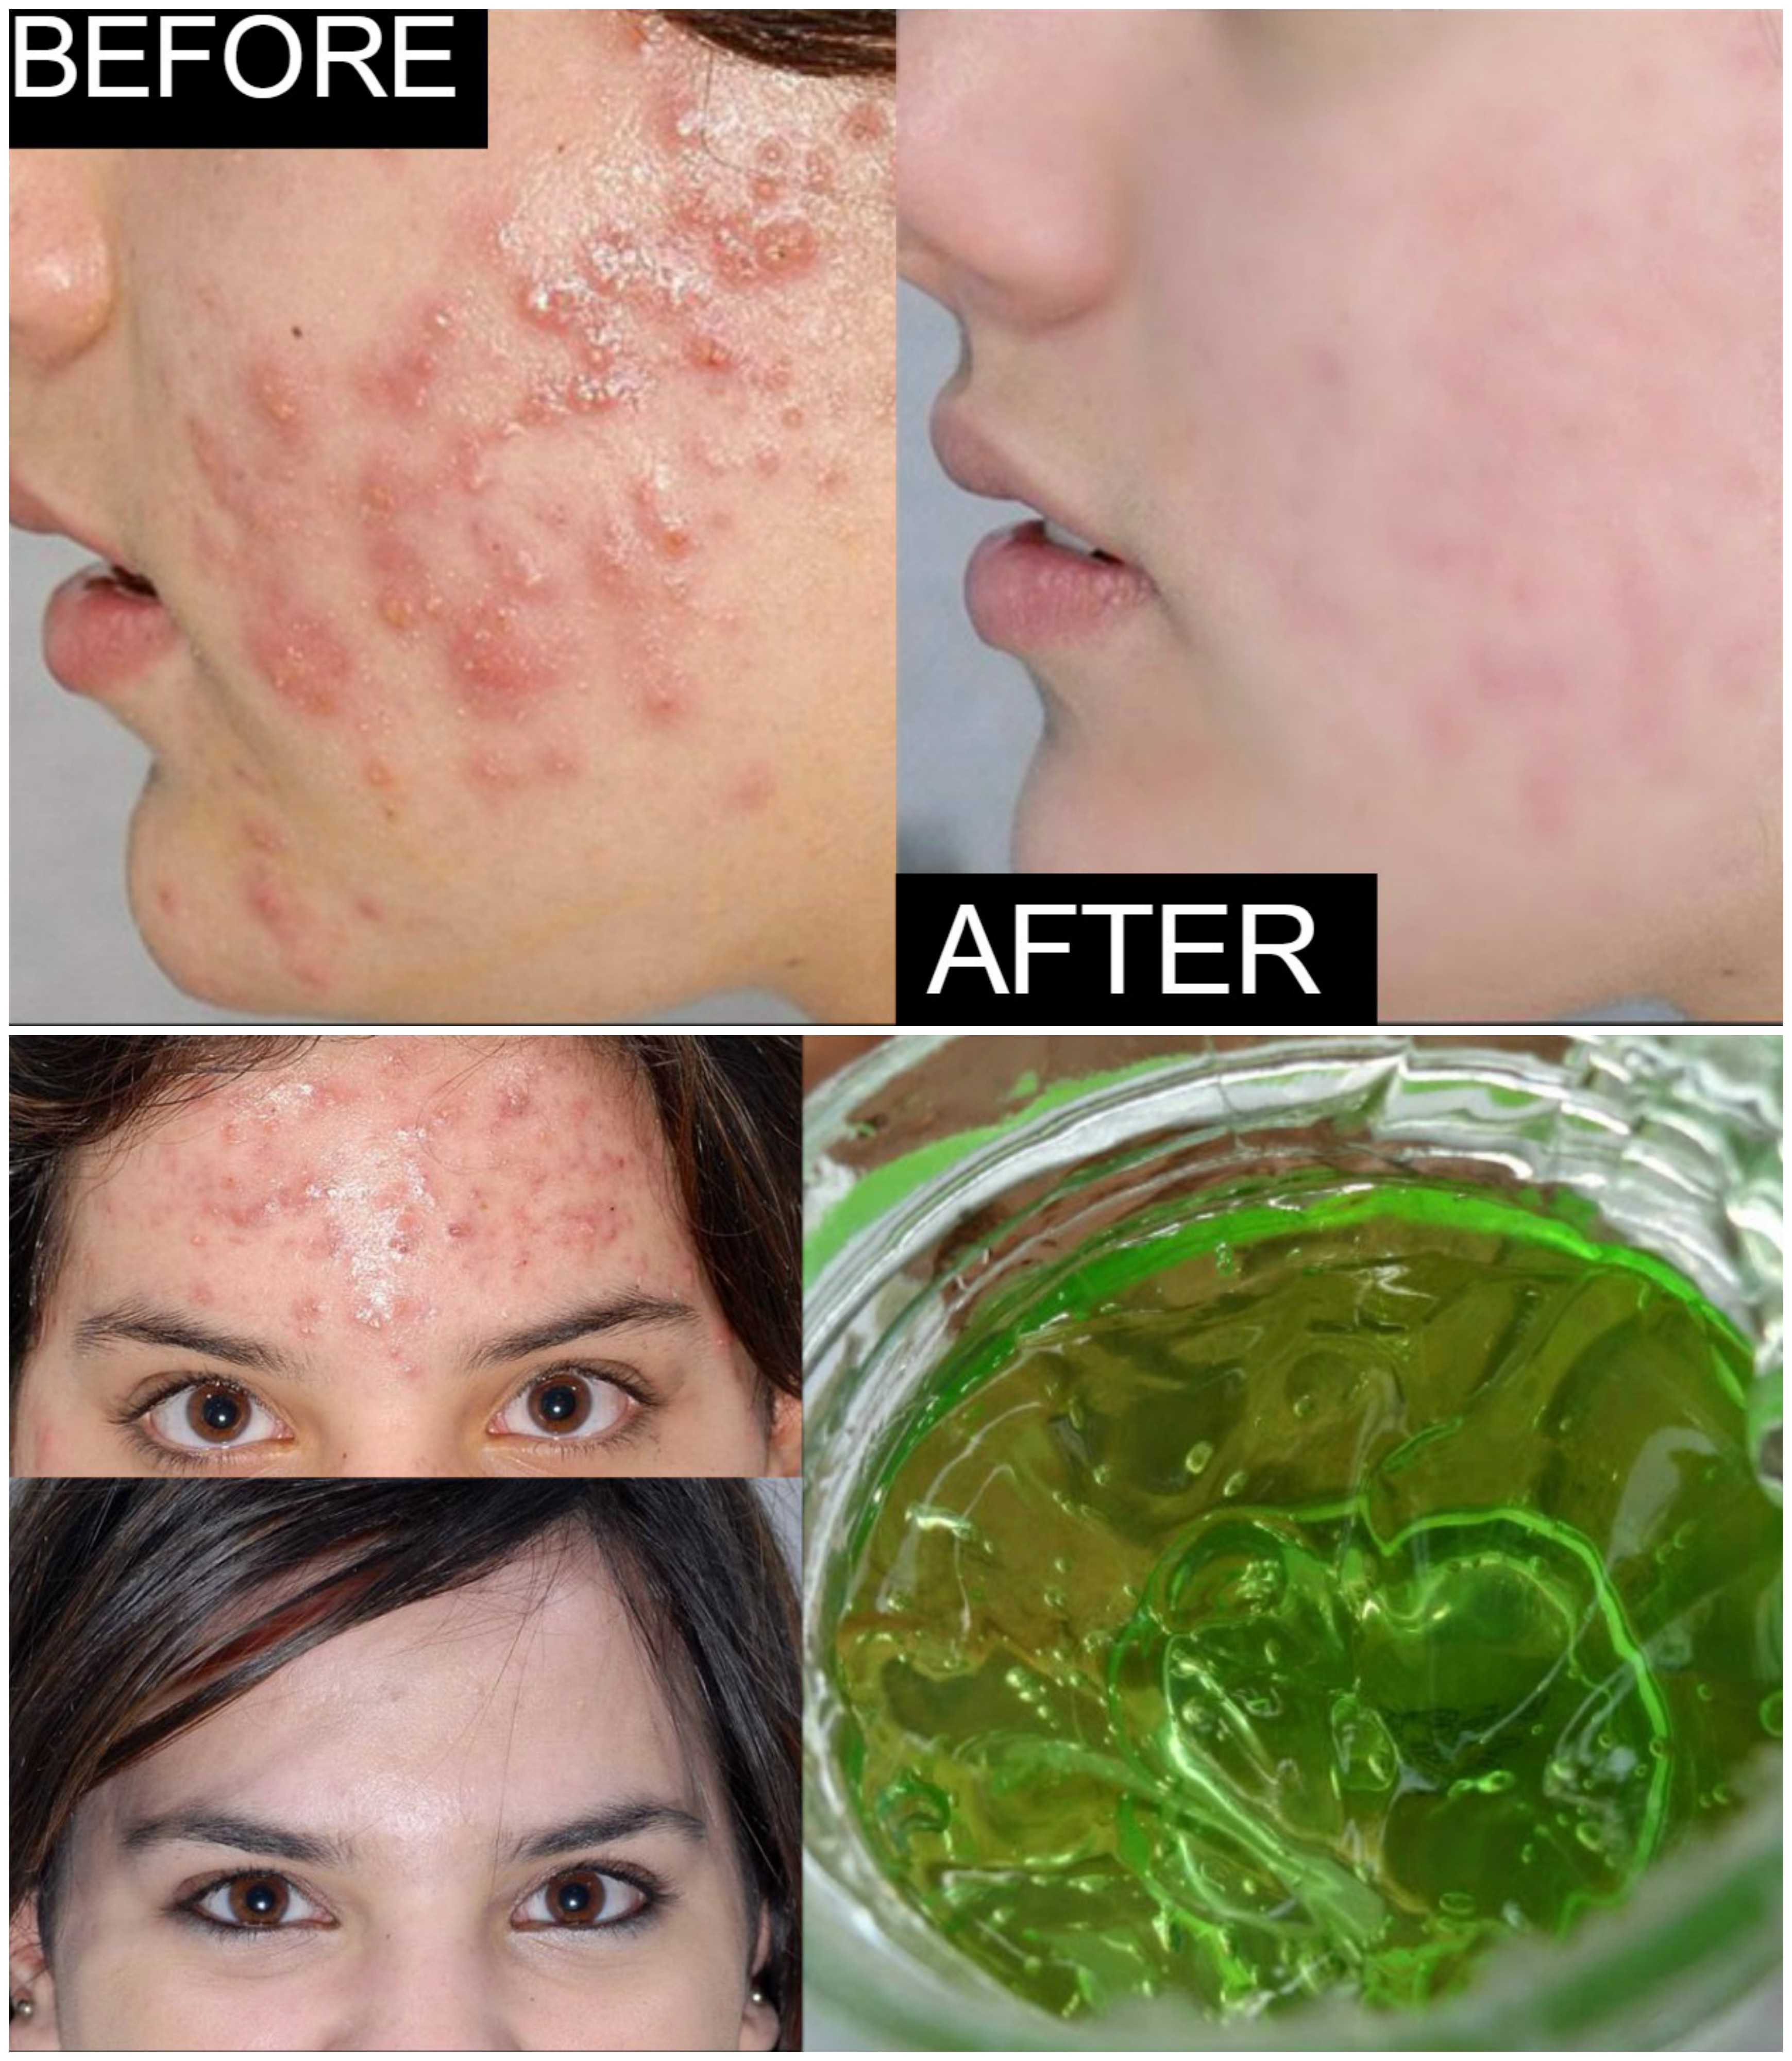 Home Remedy For Acne And Pimples - How To Get Rid of Acne